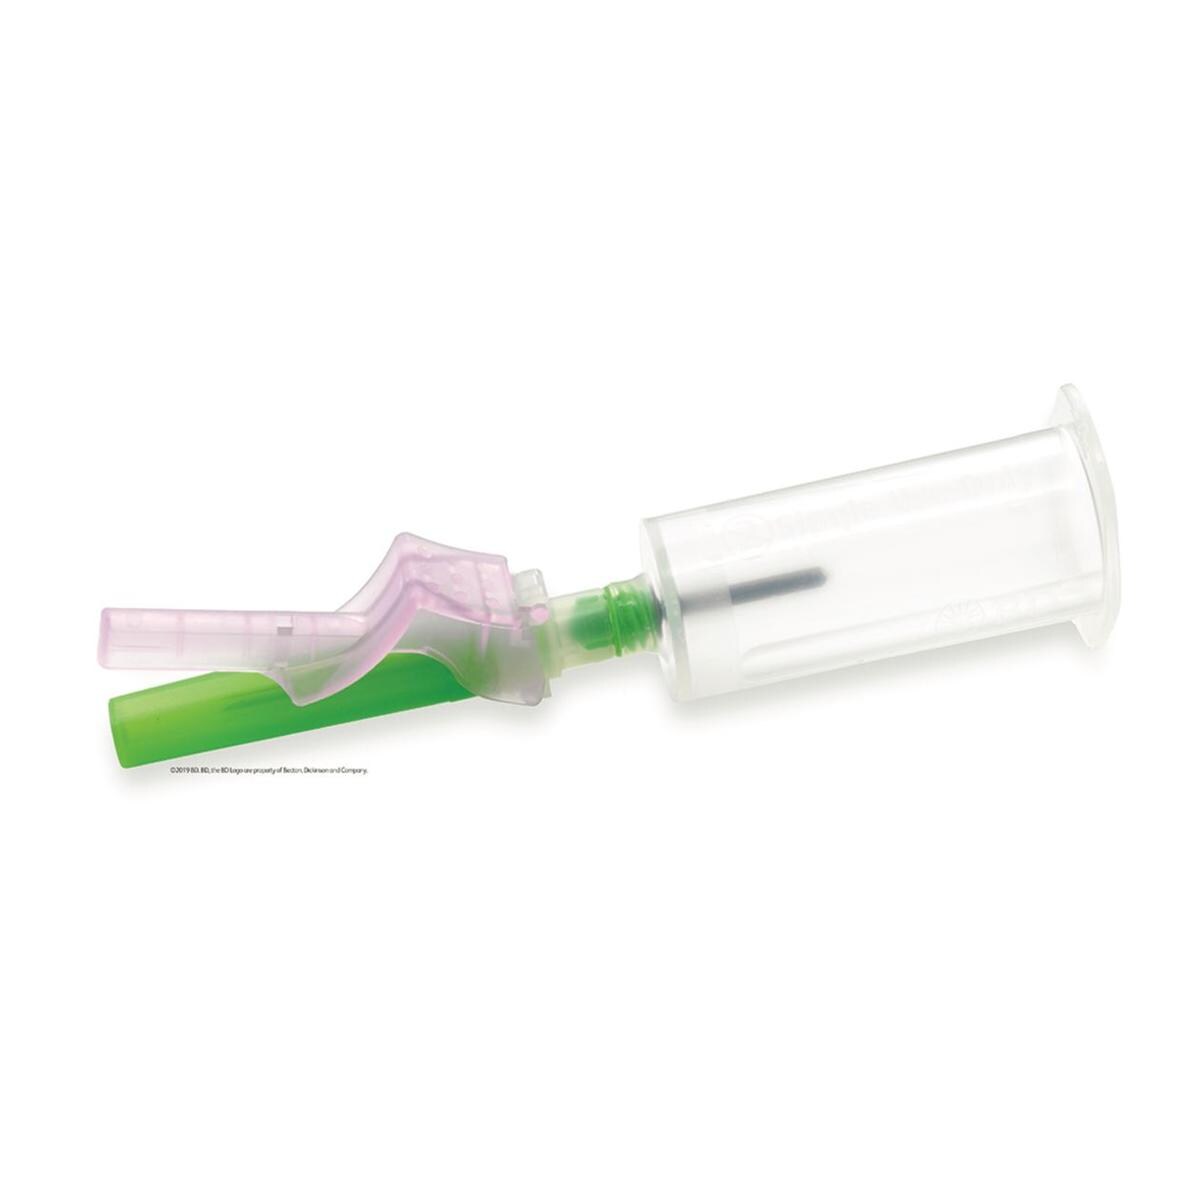 BD Vacutainer Eclipse Blood Collection Needle With Holder 21G Green 100pk